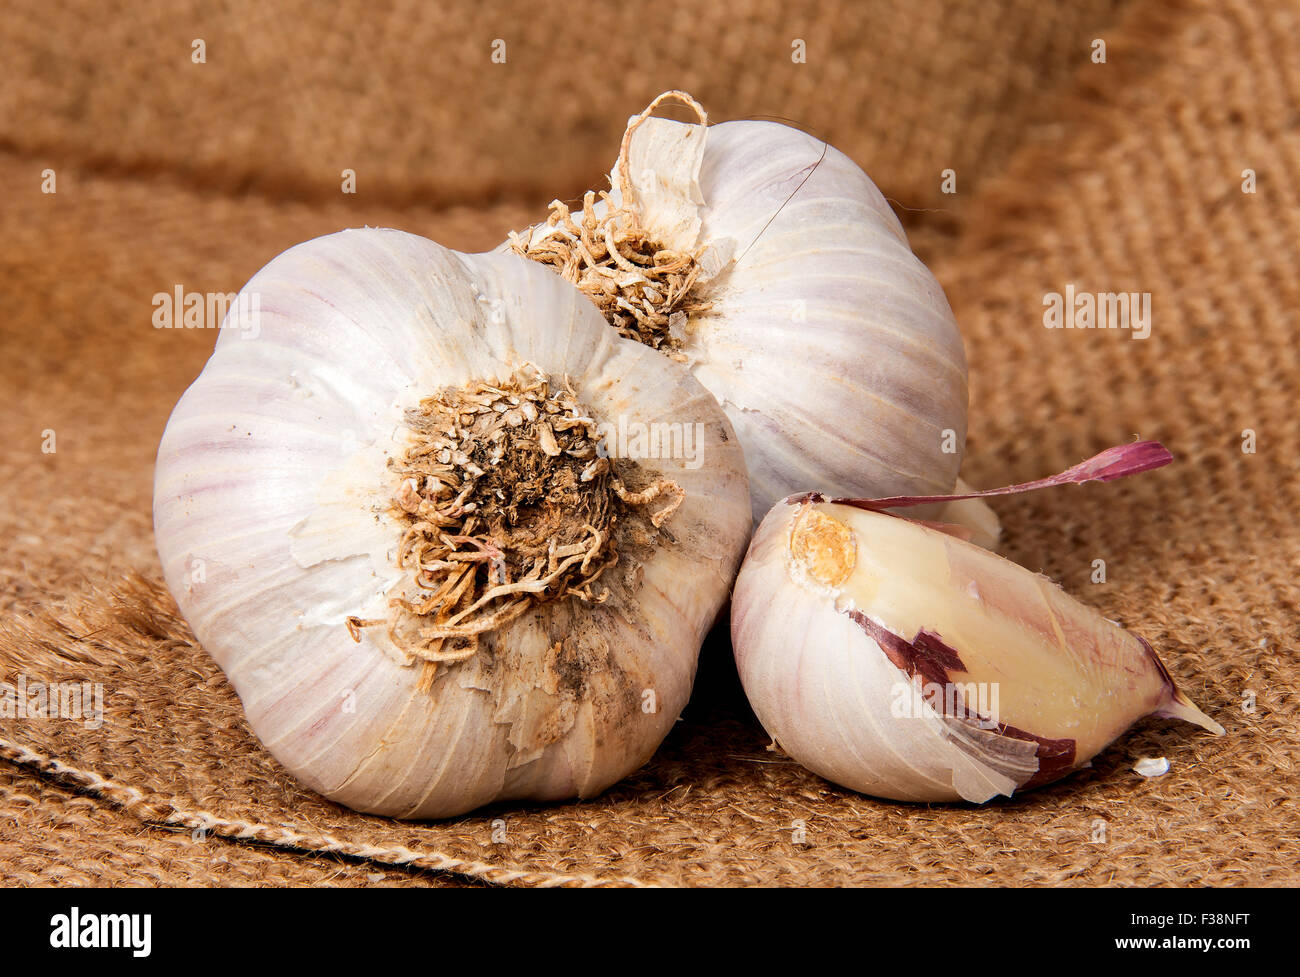 Closeup of two heads of garlic and garlic clove on sackcloth Stock Photo